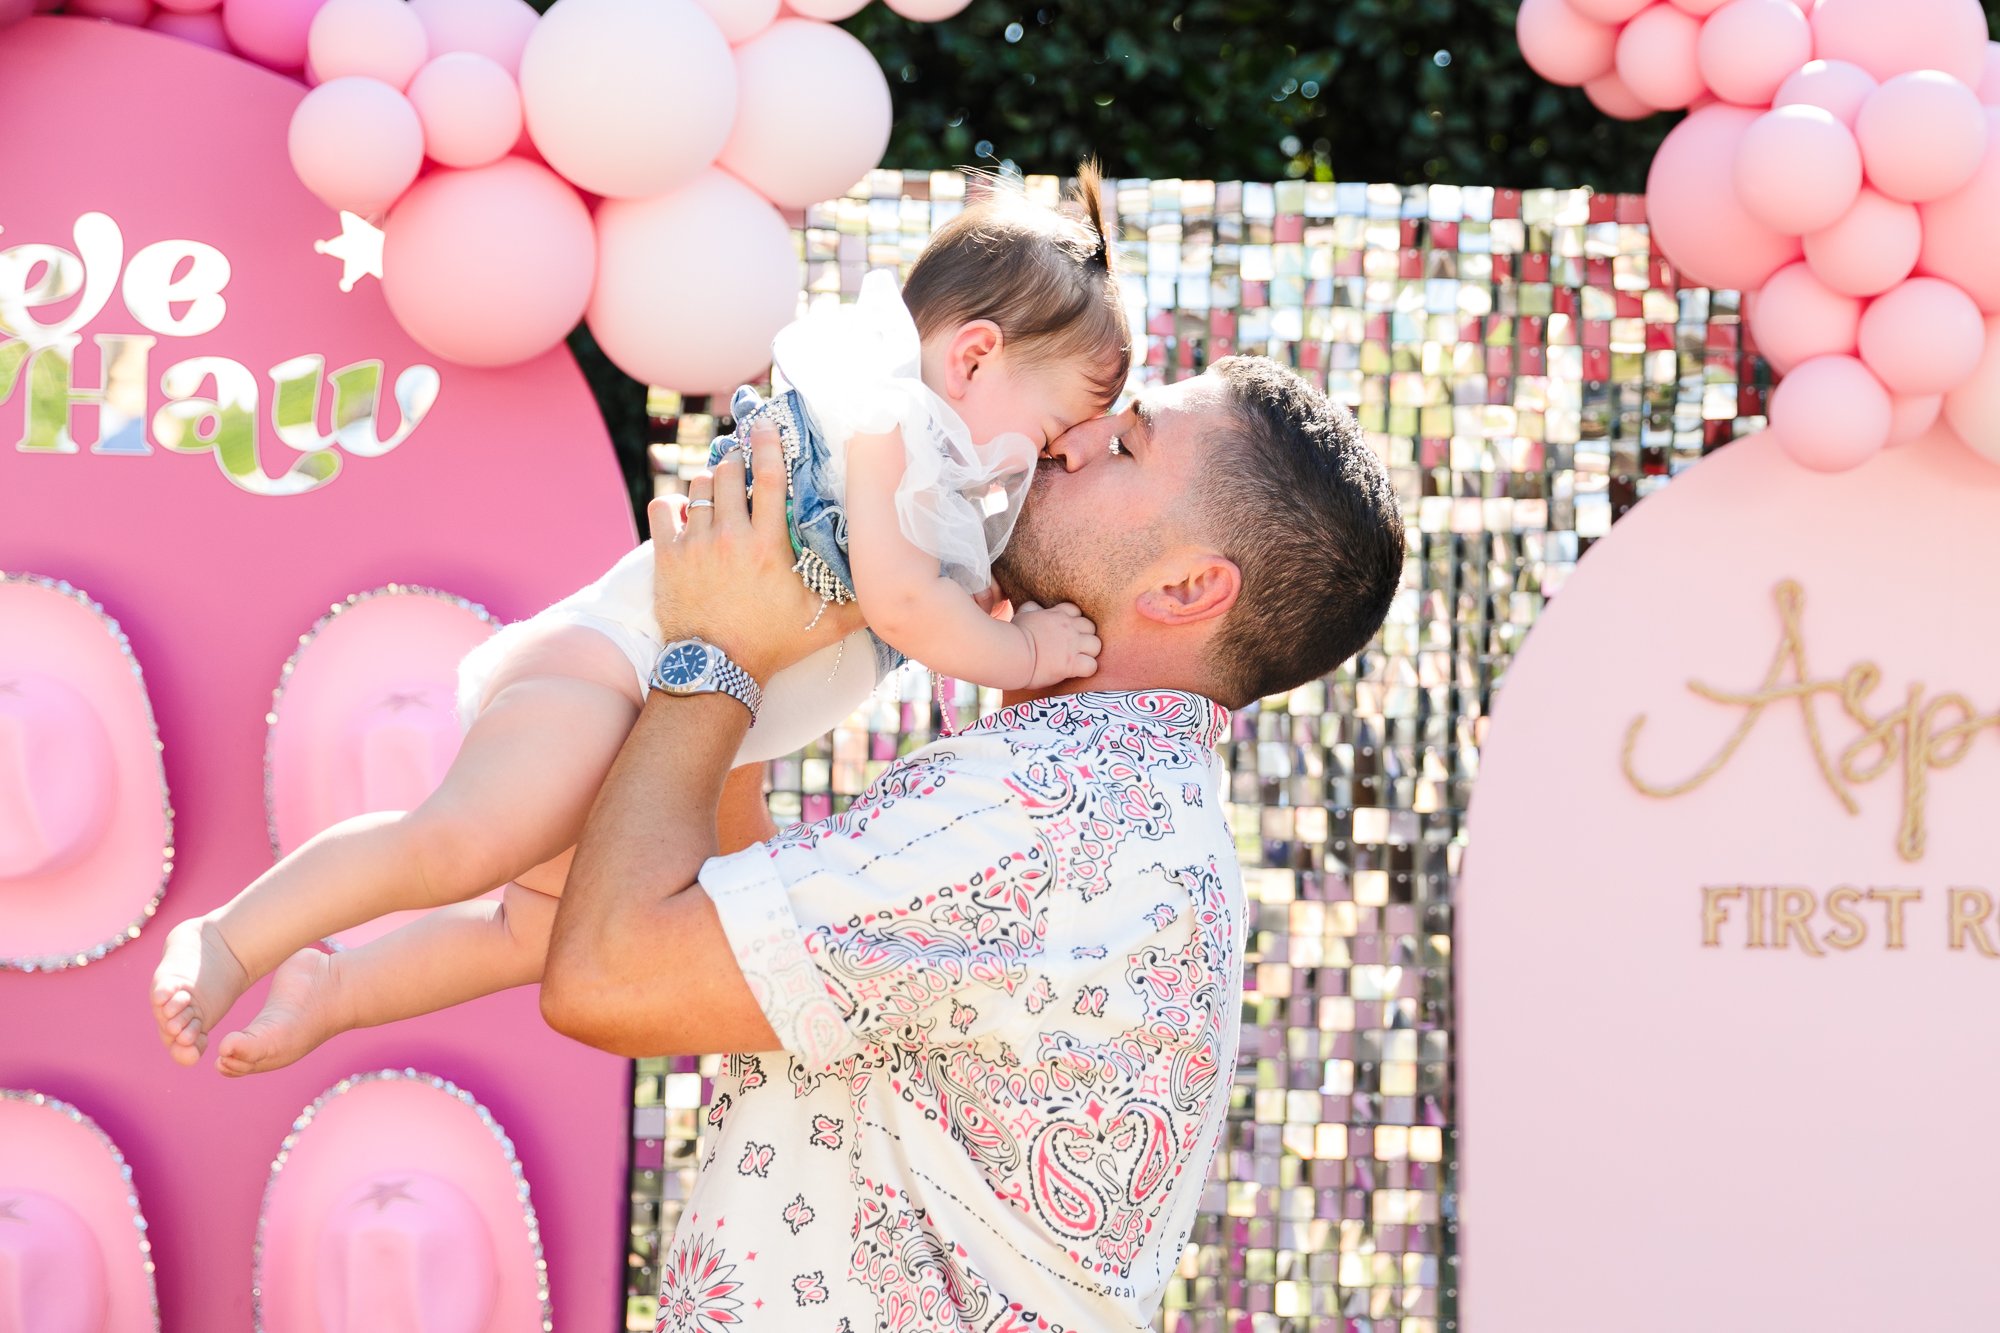 Los_Angeles_Party_Photographer_Luxury_Event_First_Birthday_Baby_Sherwood_Beverly_Hills_Cowboy_Disco_Theme_Girl_Child_Family_Photography-0231.jpg